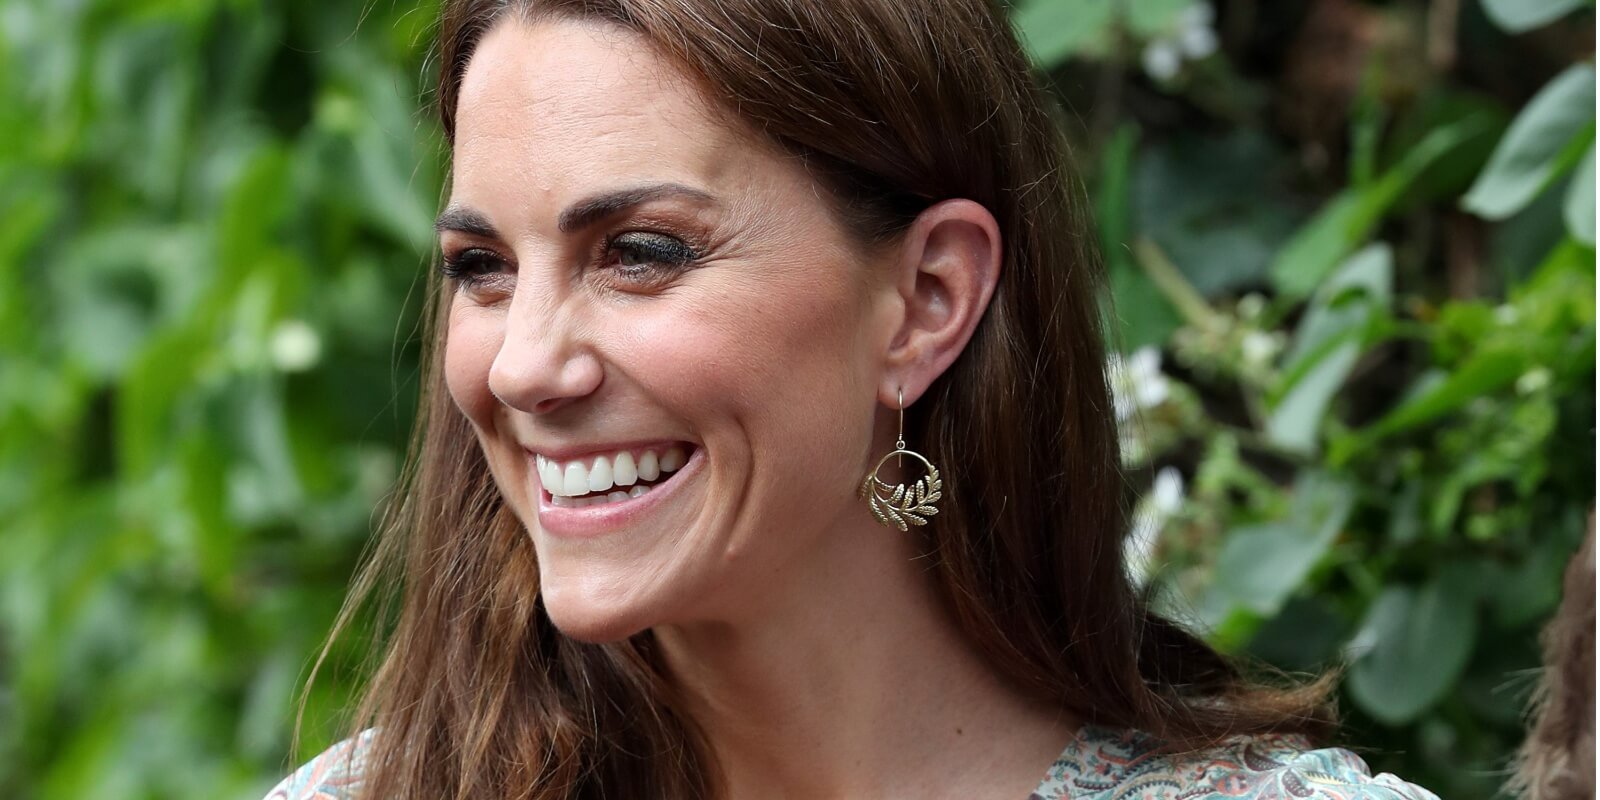 Kate Middleton holds a camera as she takes part in a a photography workshop with the charity 'Action for Children' in Kingston, southwest London on June 25, 2019.